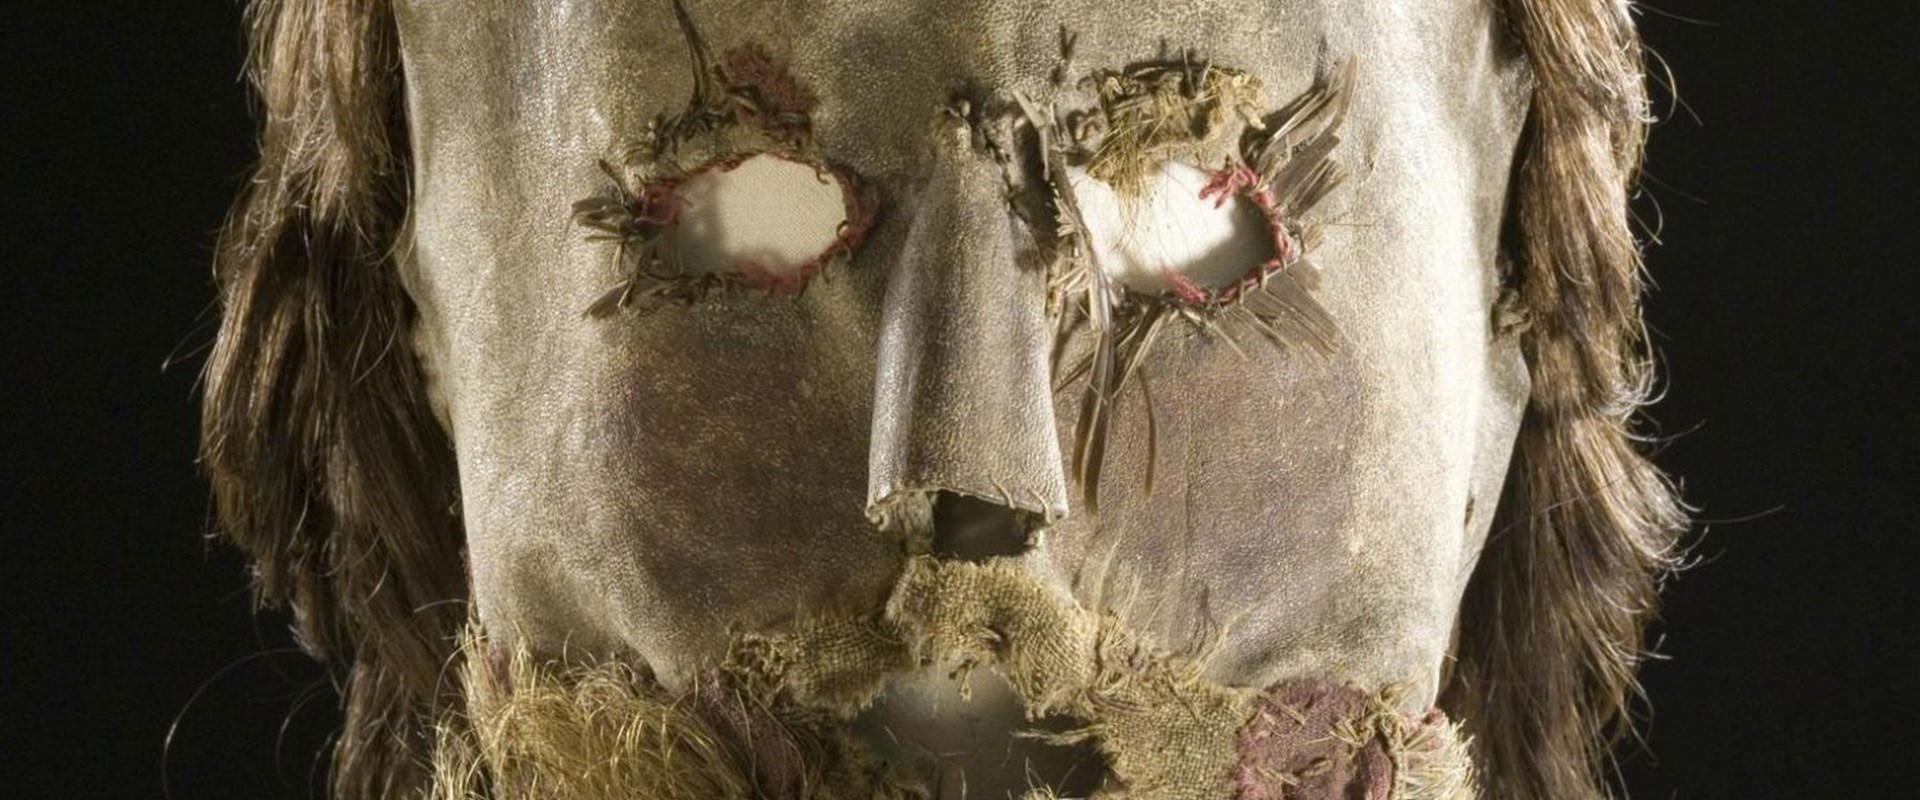 Closeup of Alexander Peden's mask. Resembles a human decaying human face with eye holes and real light brown hair with beard. 